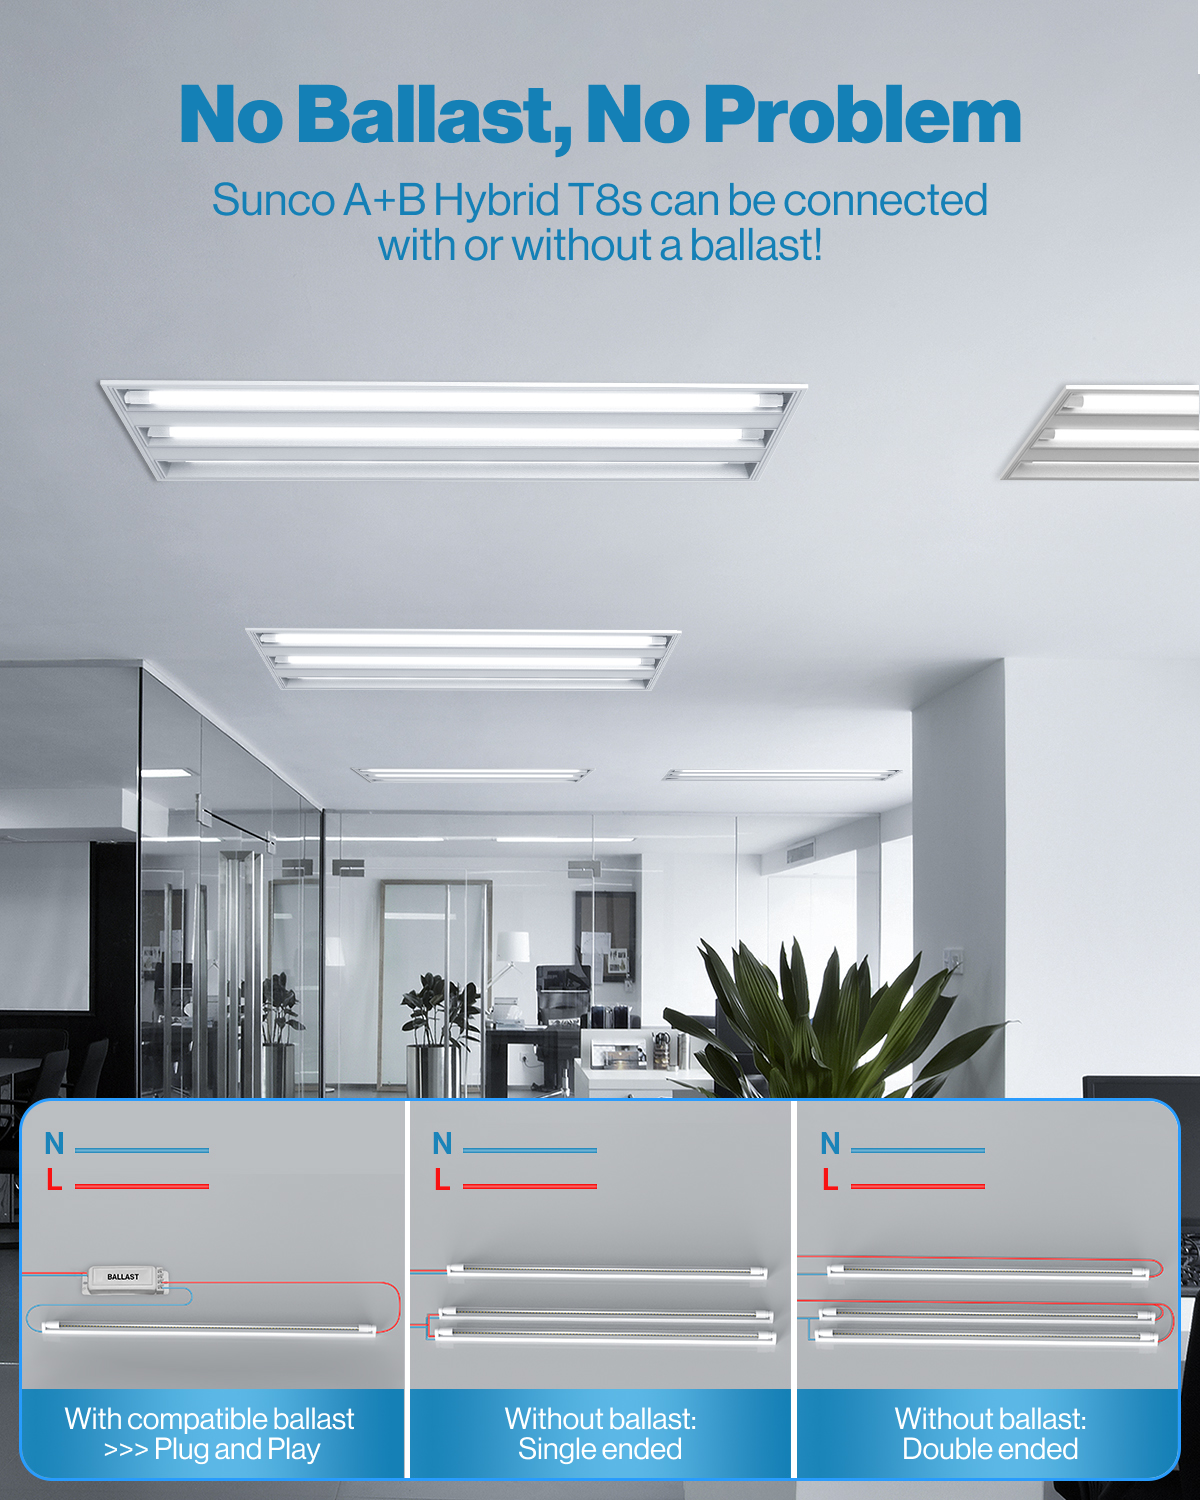 Experience bright and consistent lighting with LED tube lights. They provide instant illumination without any flickering or warm-up time, ensuring a comfortable and productive environment.